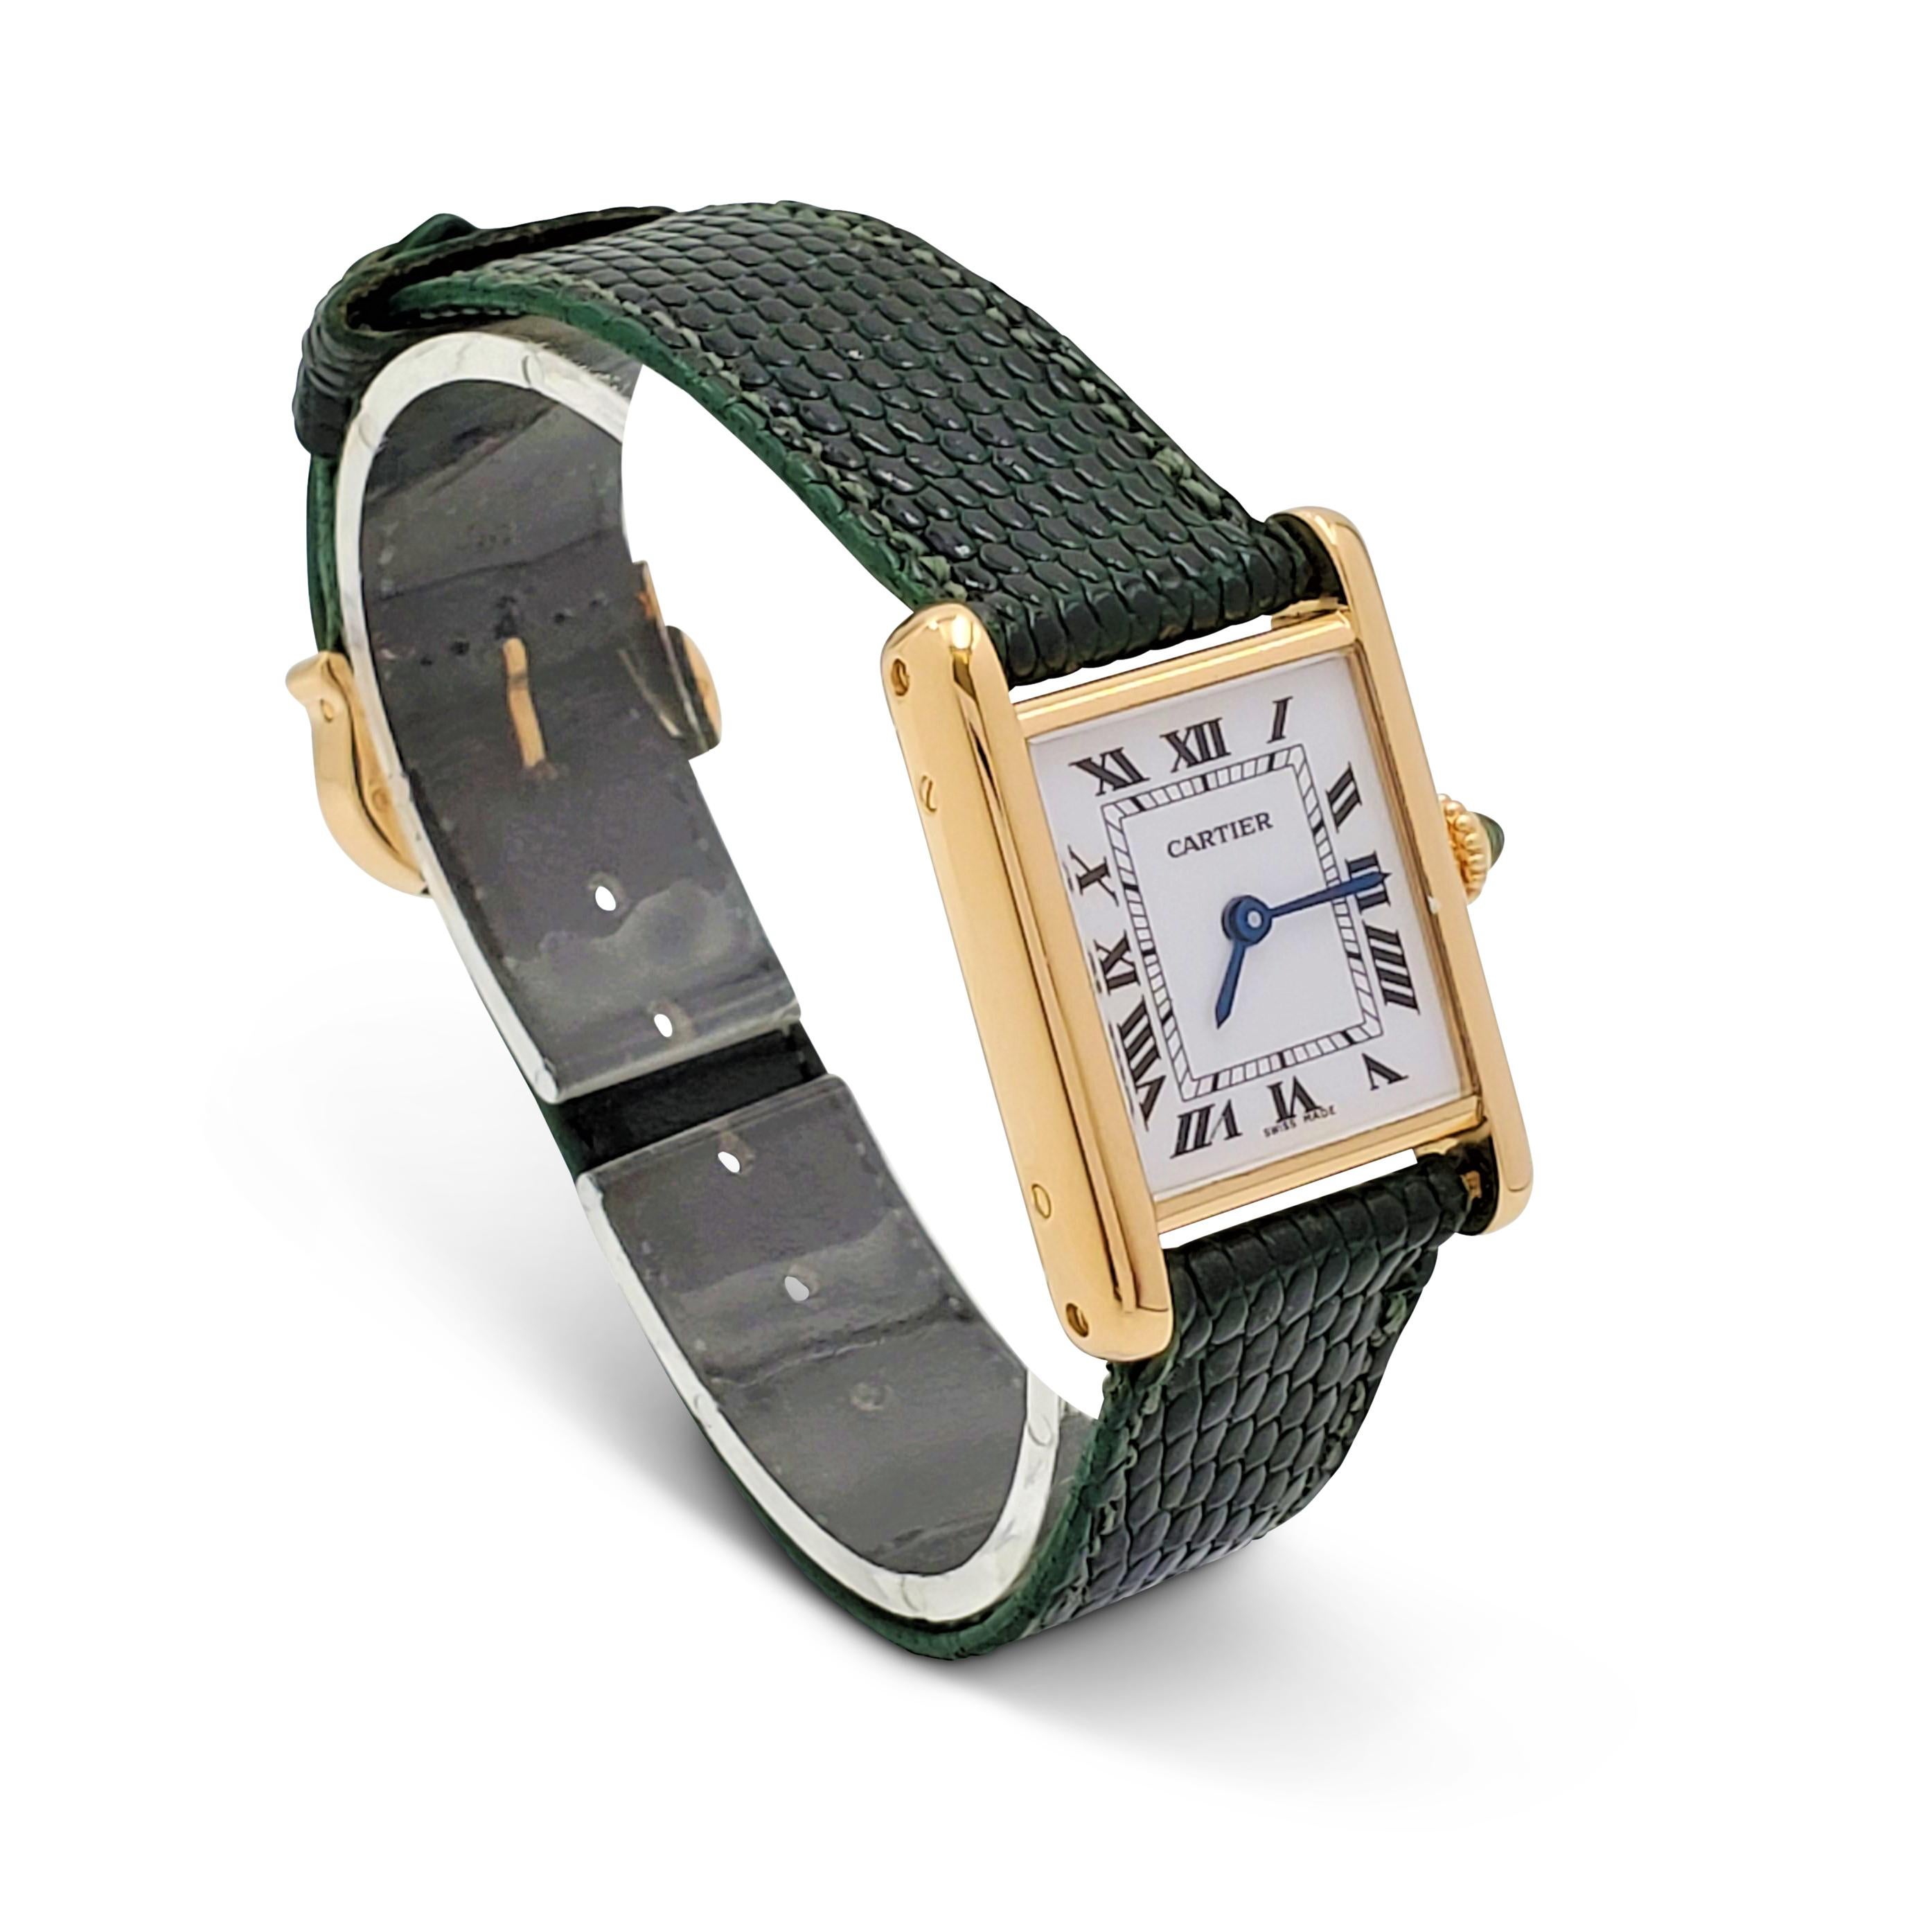 Authentic Cartier 'Tank Louis' ladies watch crafted in 18 karat yellow gold features a classic rectangular case measuring 28 x 20 mm. The porcelain dial is in pristine condition, with black Roman numerals and blued-steel sword-shaped hands. Secret